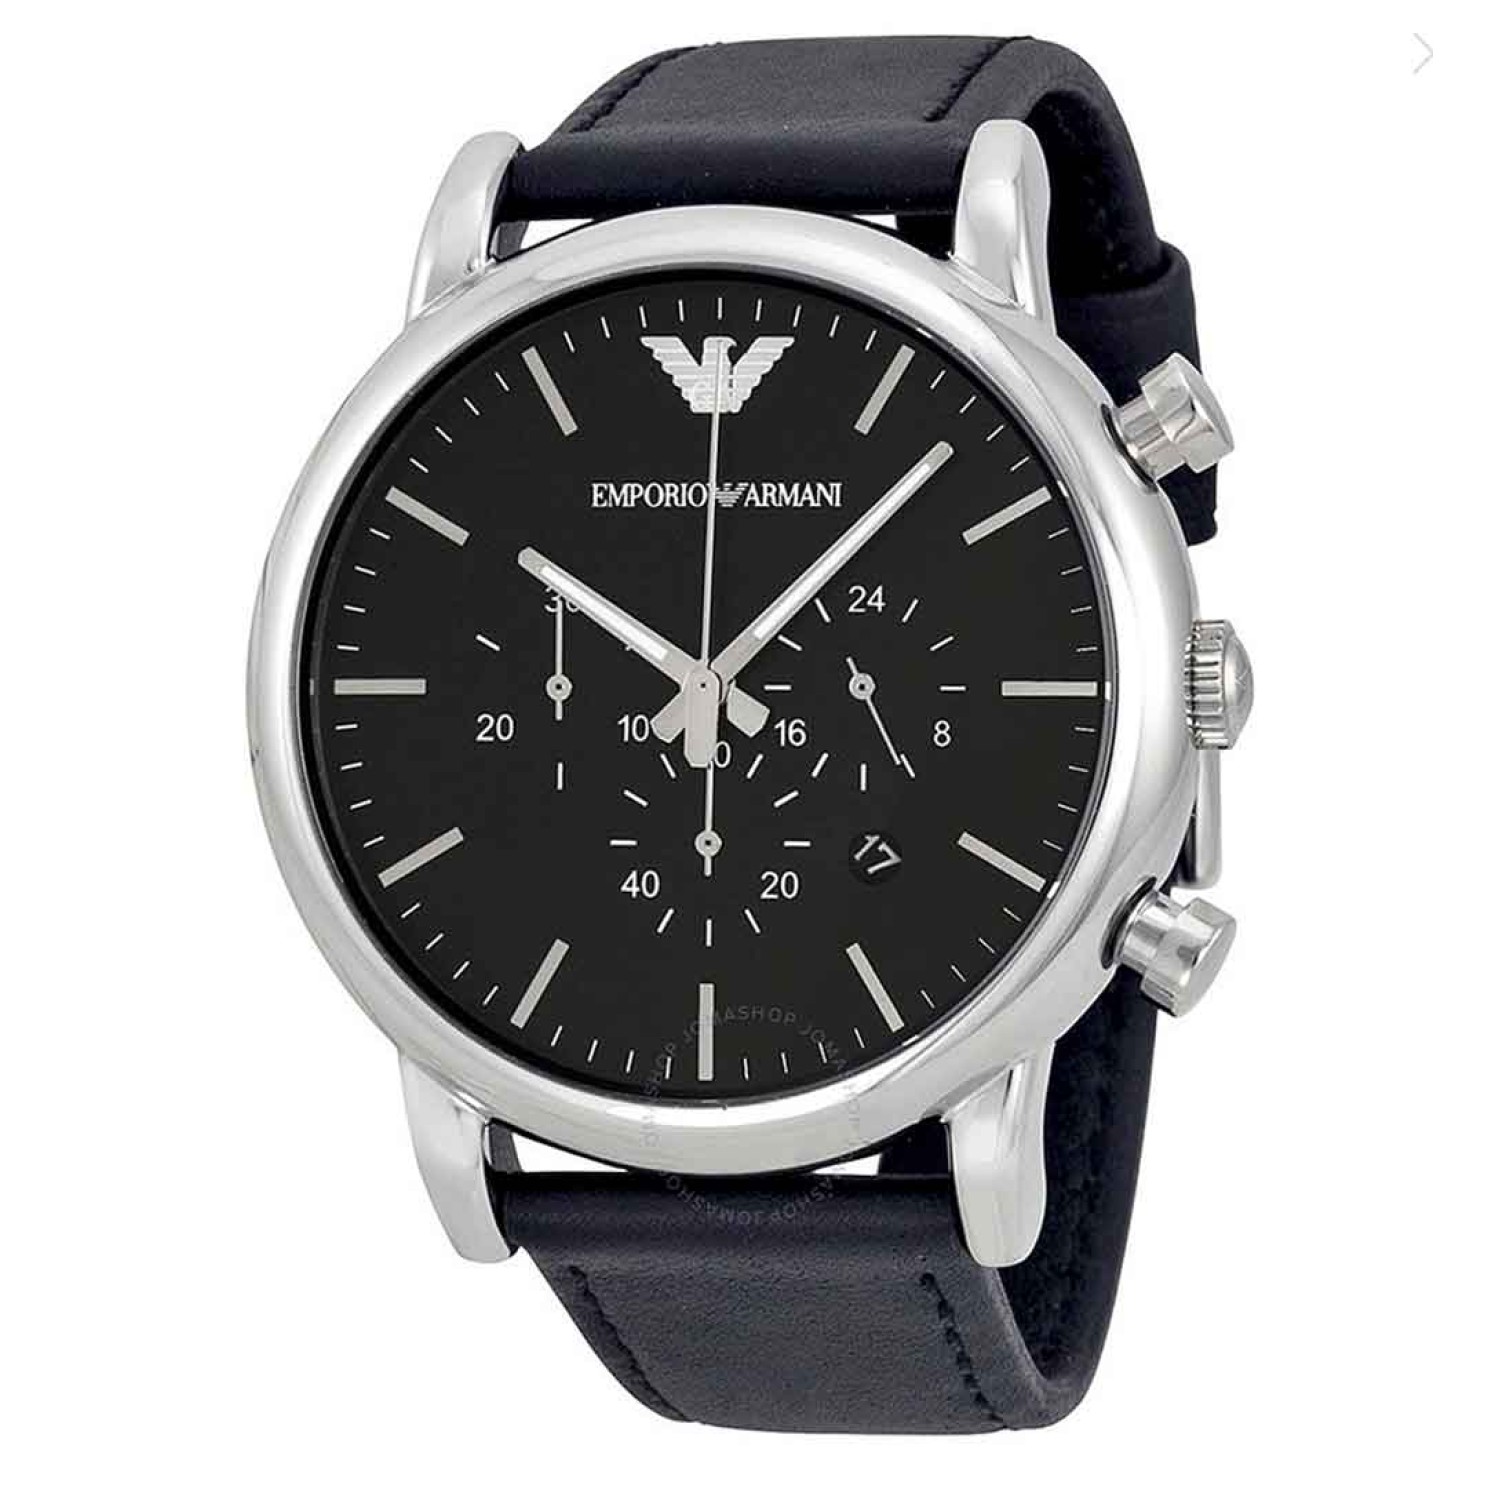 AR1828 Emporio Armani Mens Chronograph Watch. The Emporio Armani AR1828 case material is Stainless Steel while the dial colour is Black. The features of the watch include (among others) a chronograph and date function.3 Months No Payments and Interest for